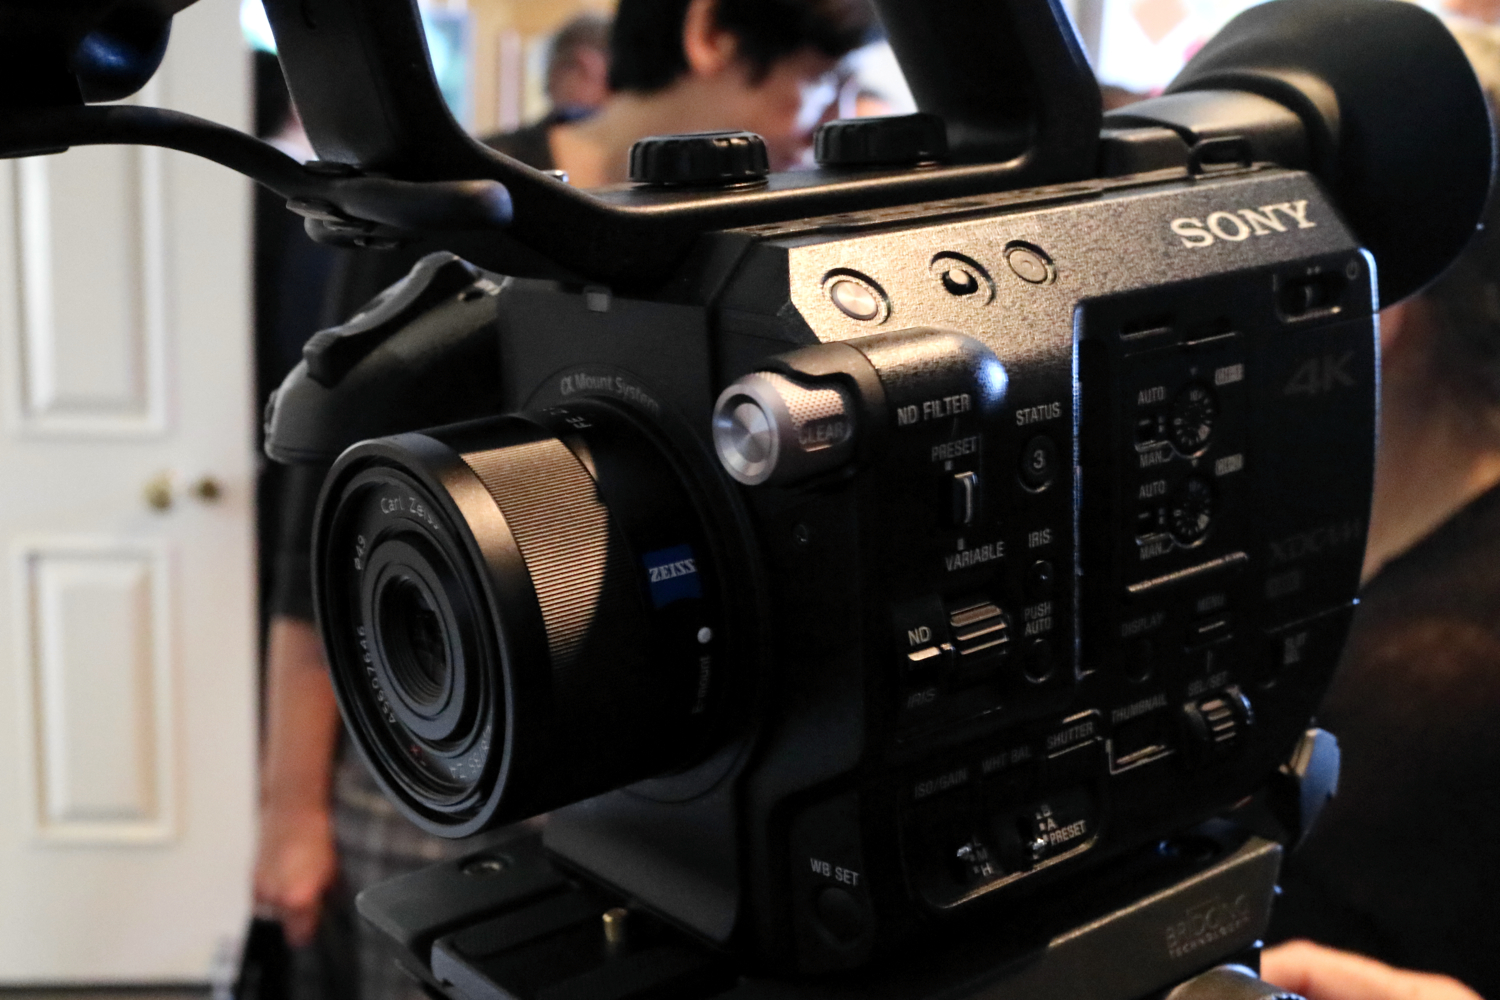 sonys compact 4k super 35mm camcorder will take your youtube videos to next level sony fs5 2